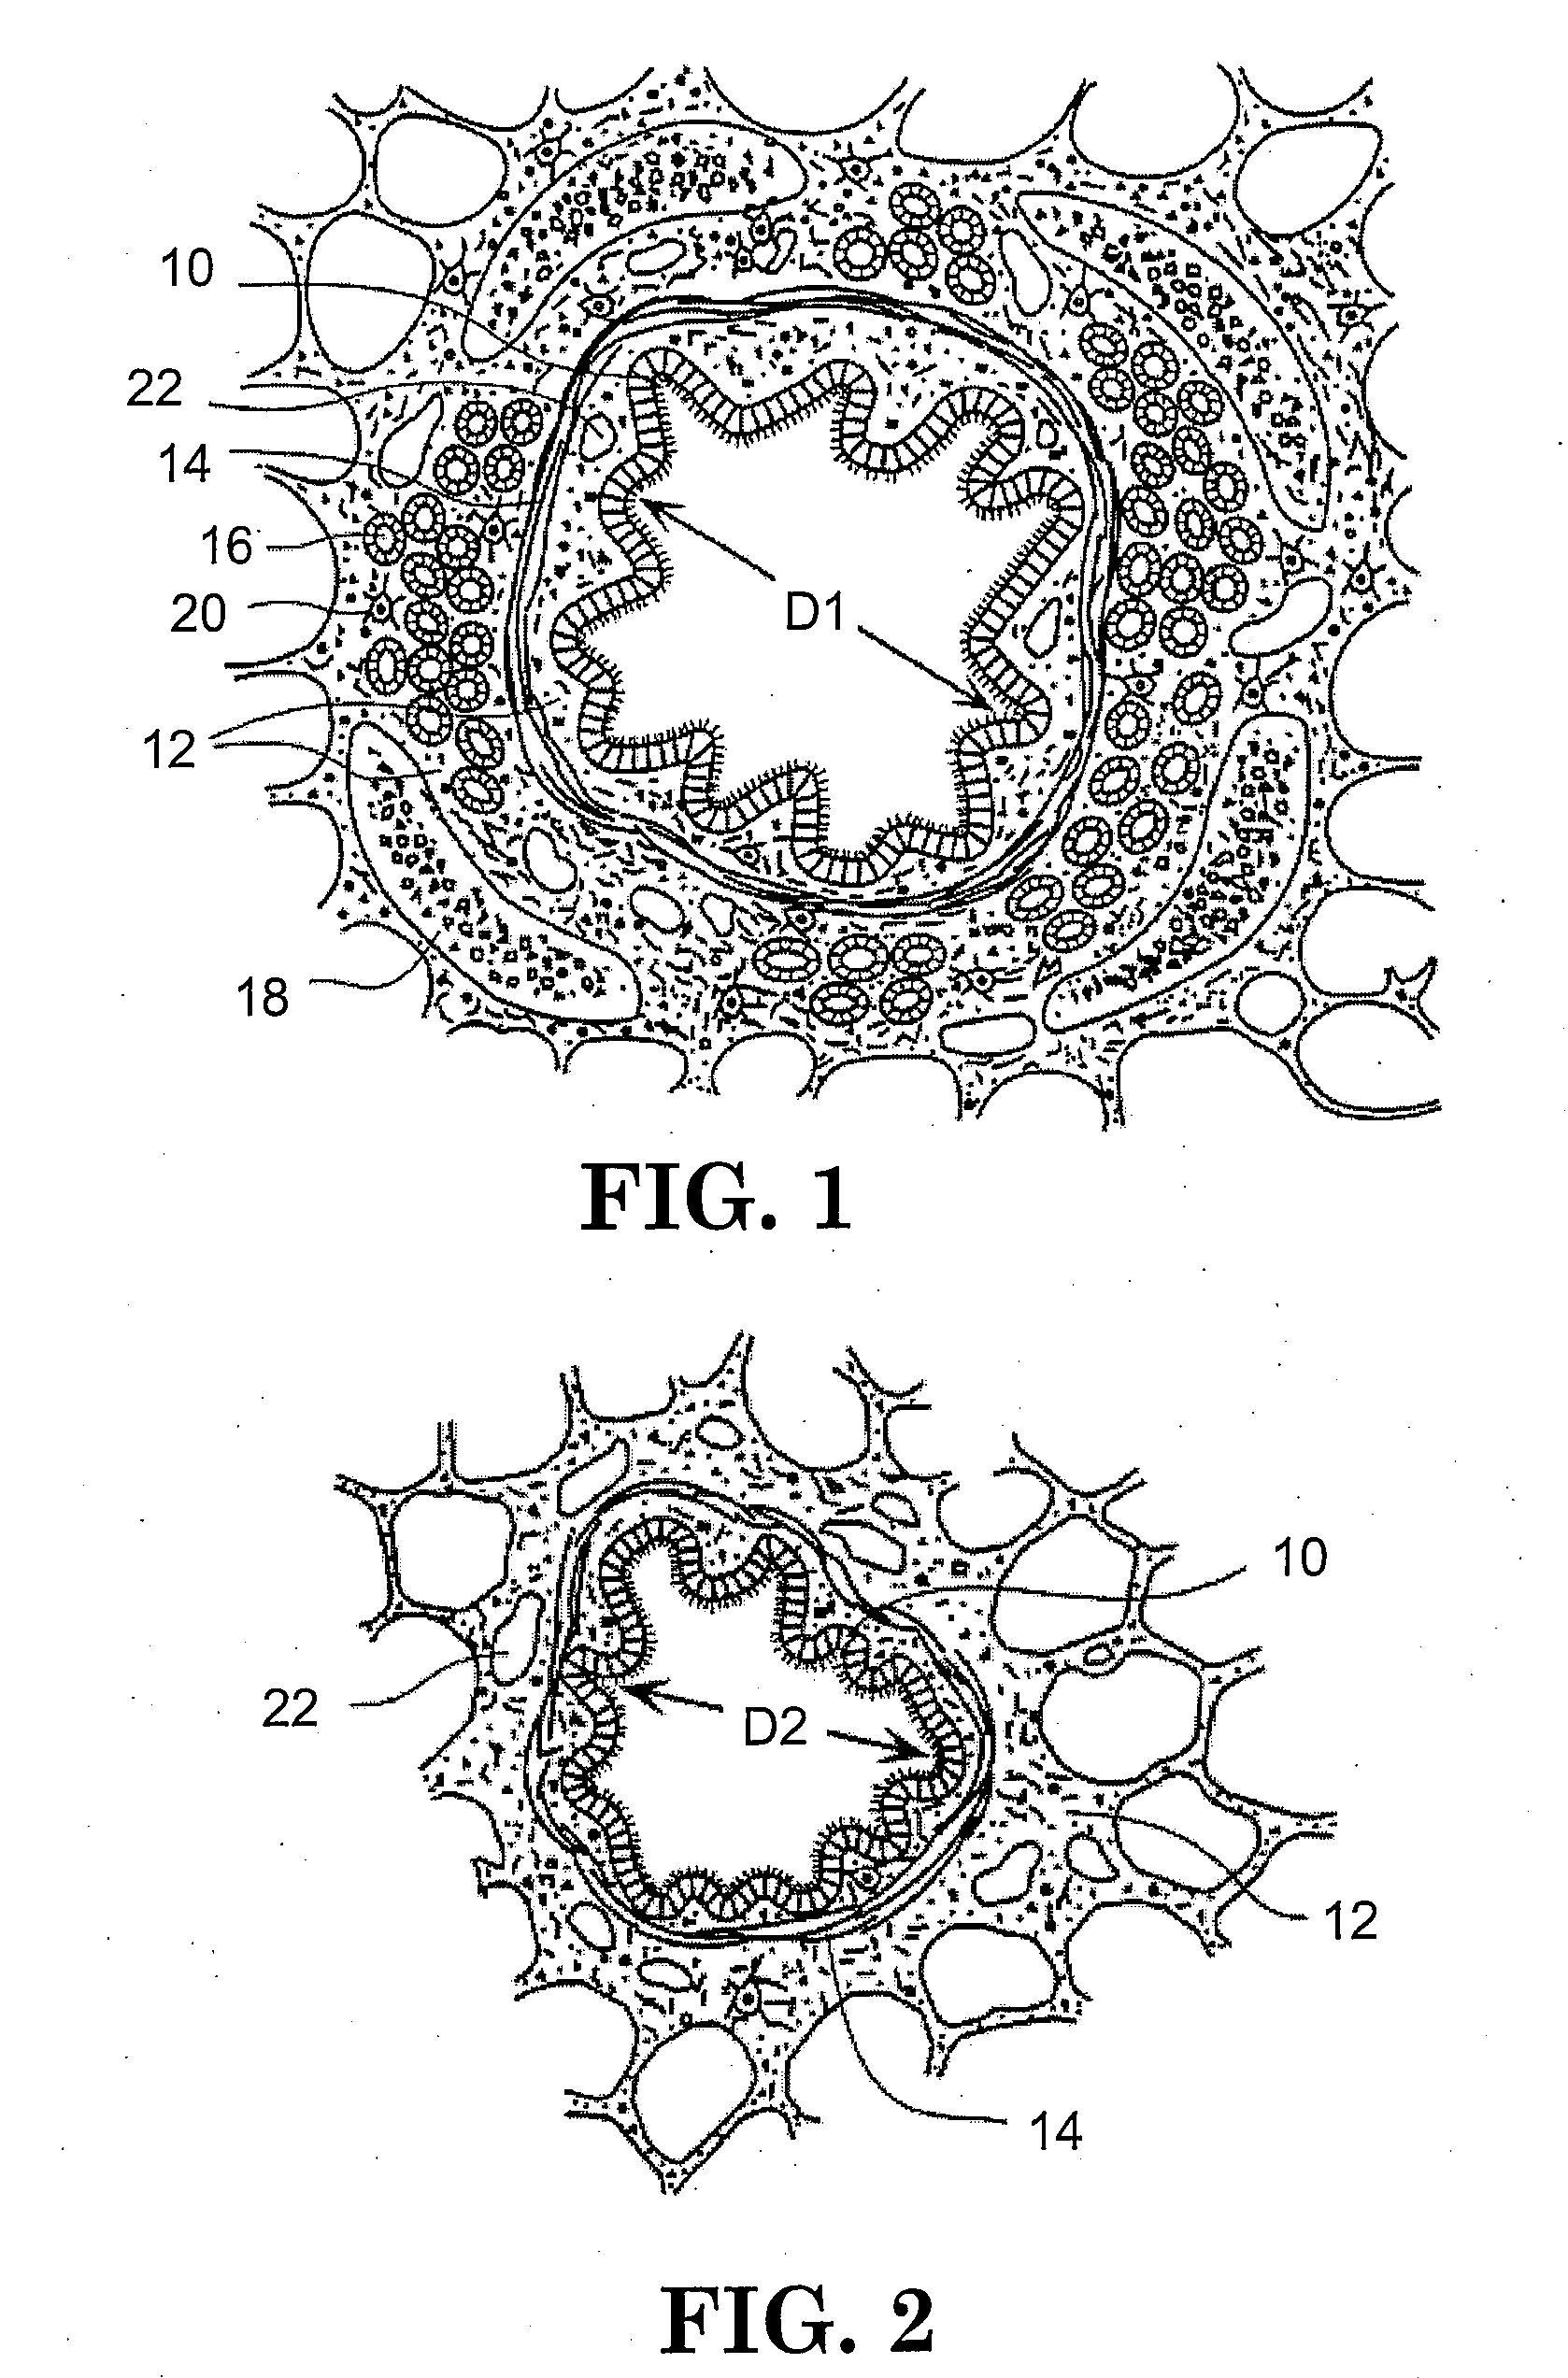 Method for treating airways in the lung